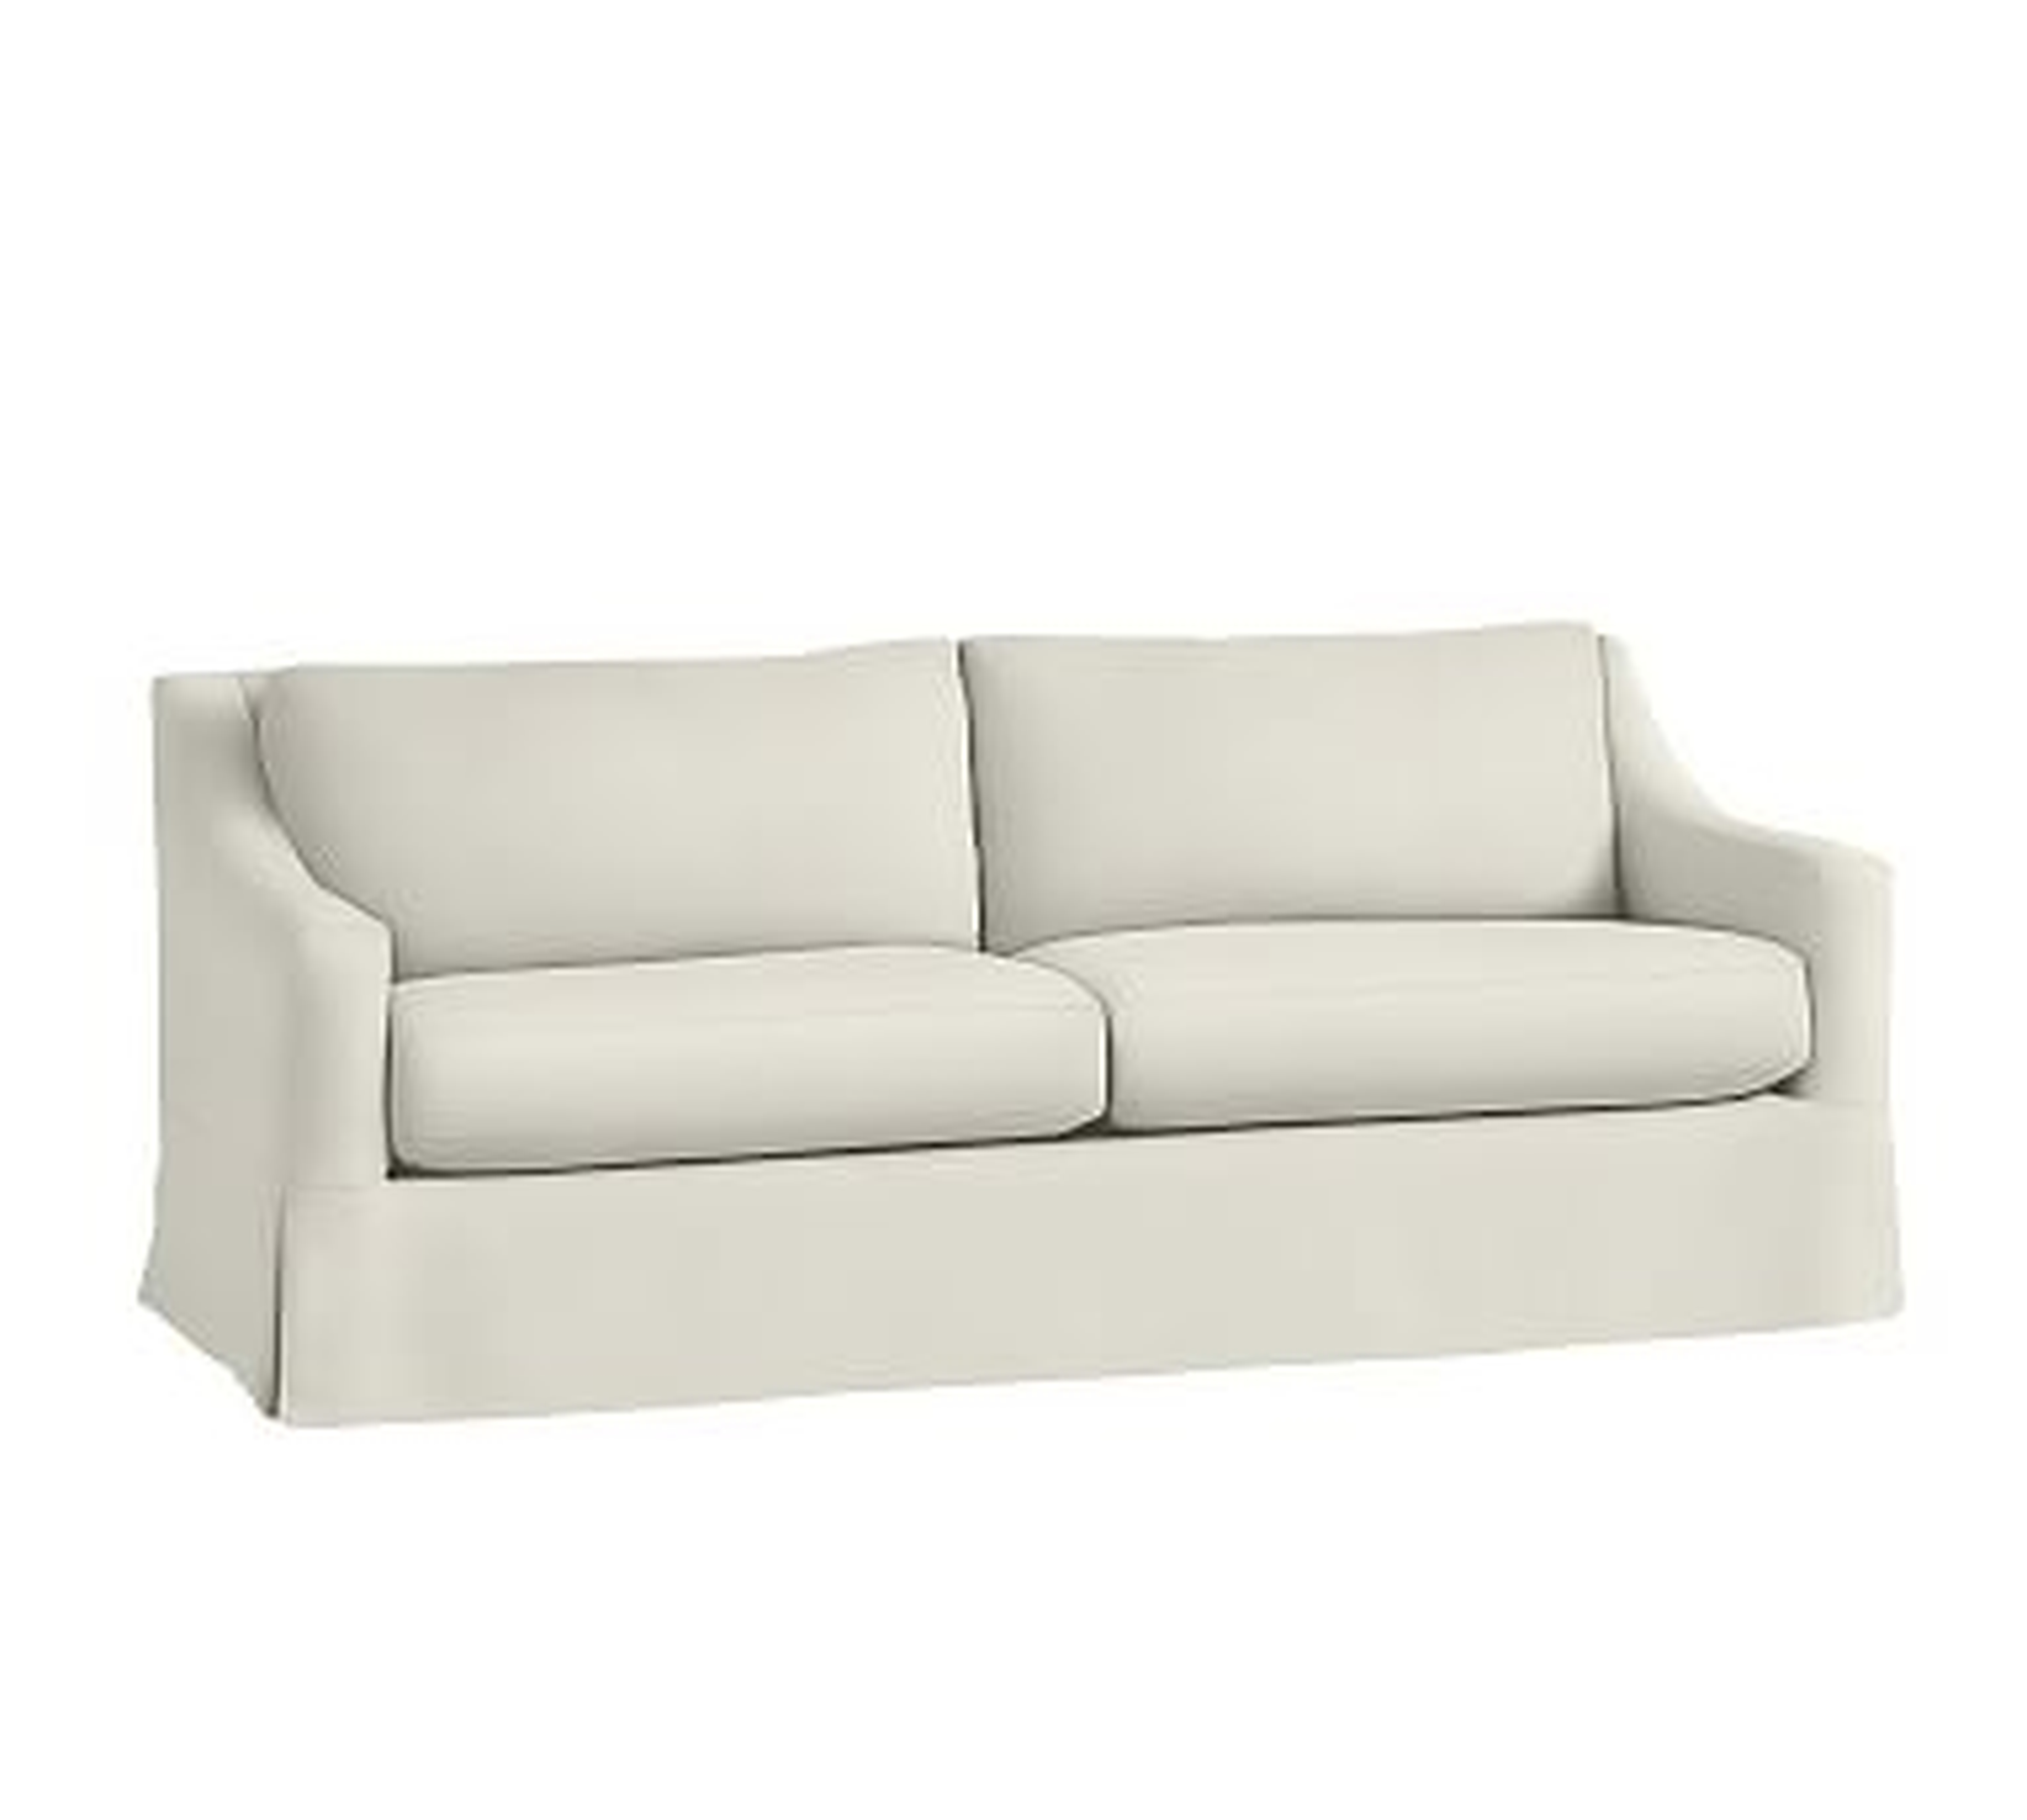 York Slope Arm Slipcovered Sofa 80", Down Blend Wrapped Cushions, Washed Linen/Cotton Ivory - Pottery Barn